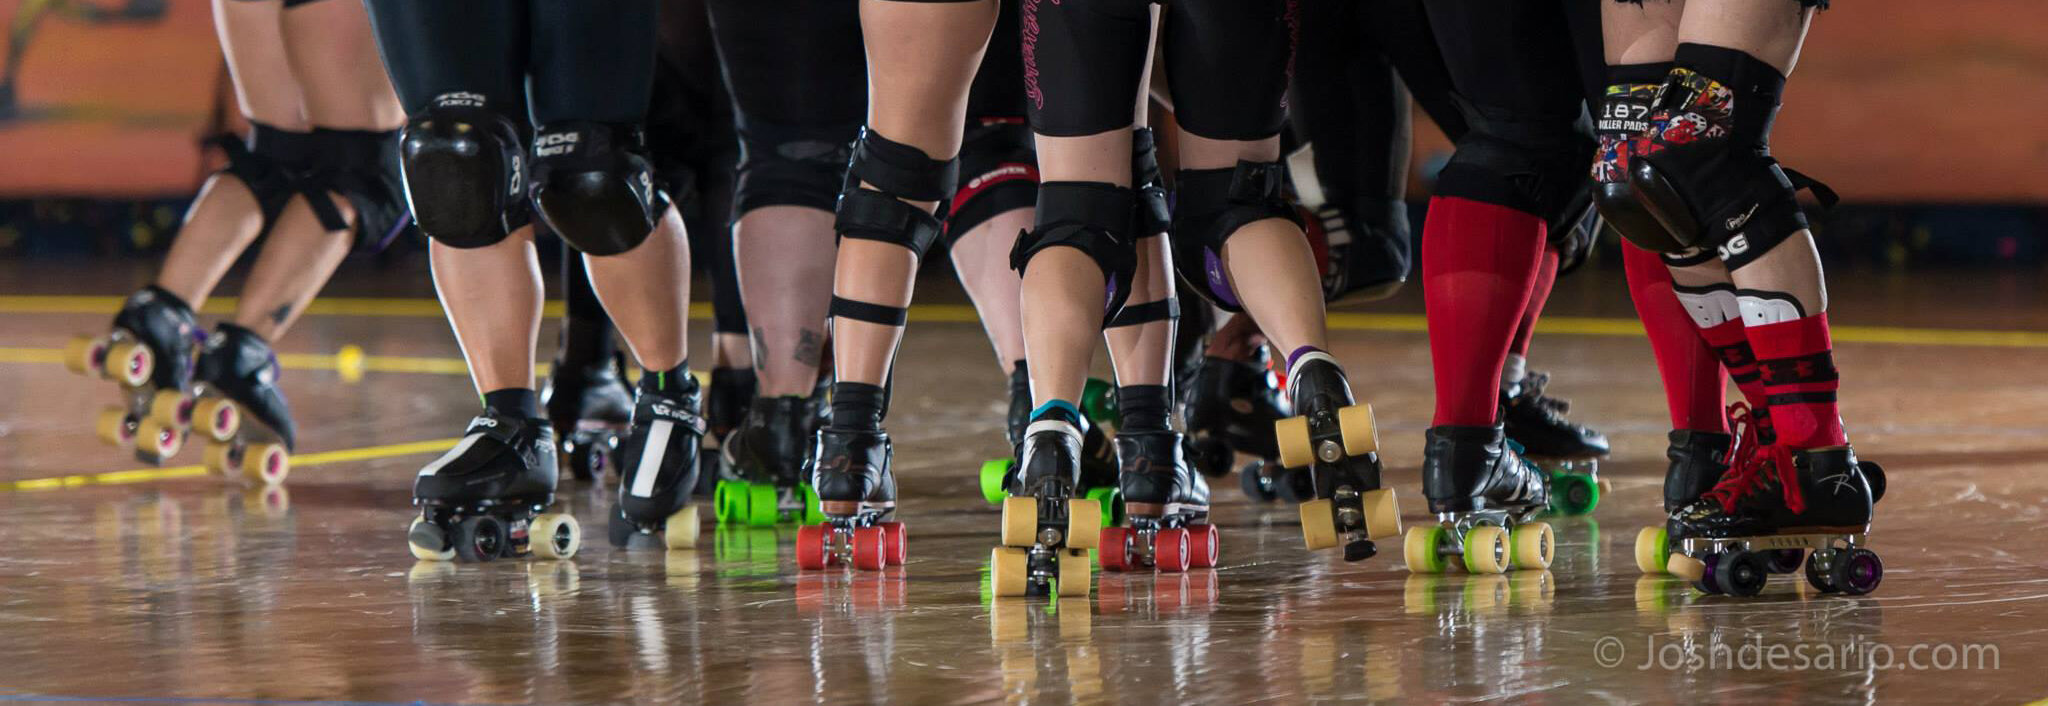 All About Skates — Bradentucky Bombers Roller Derby